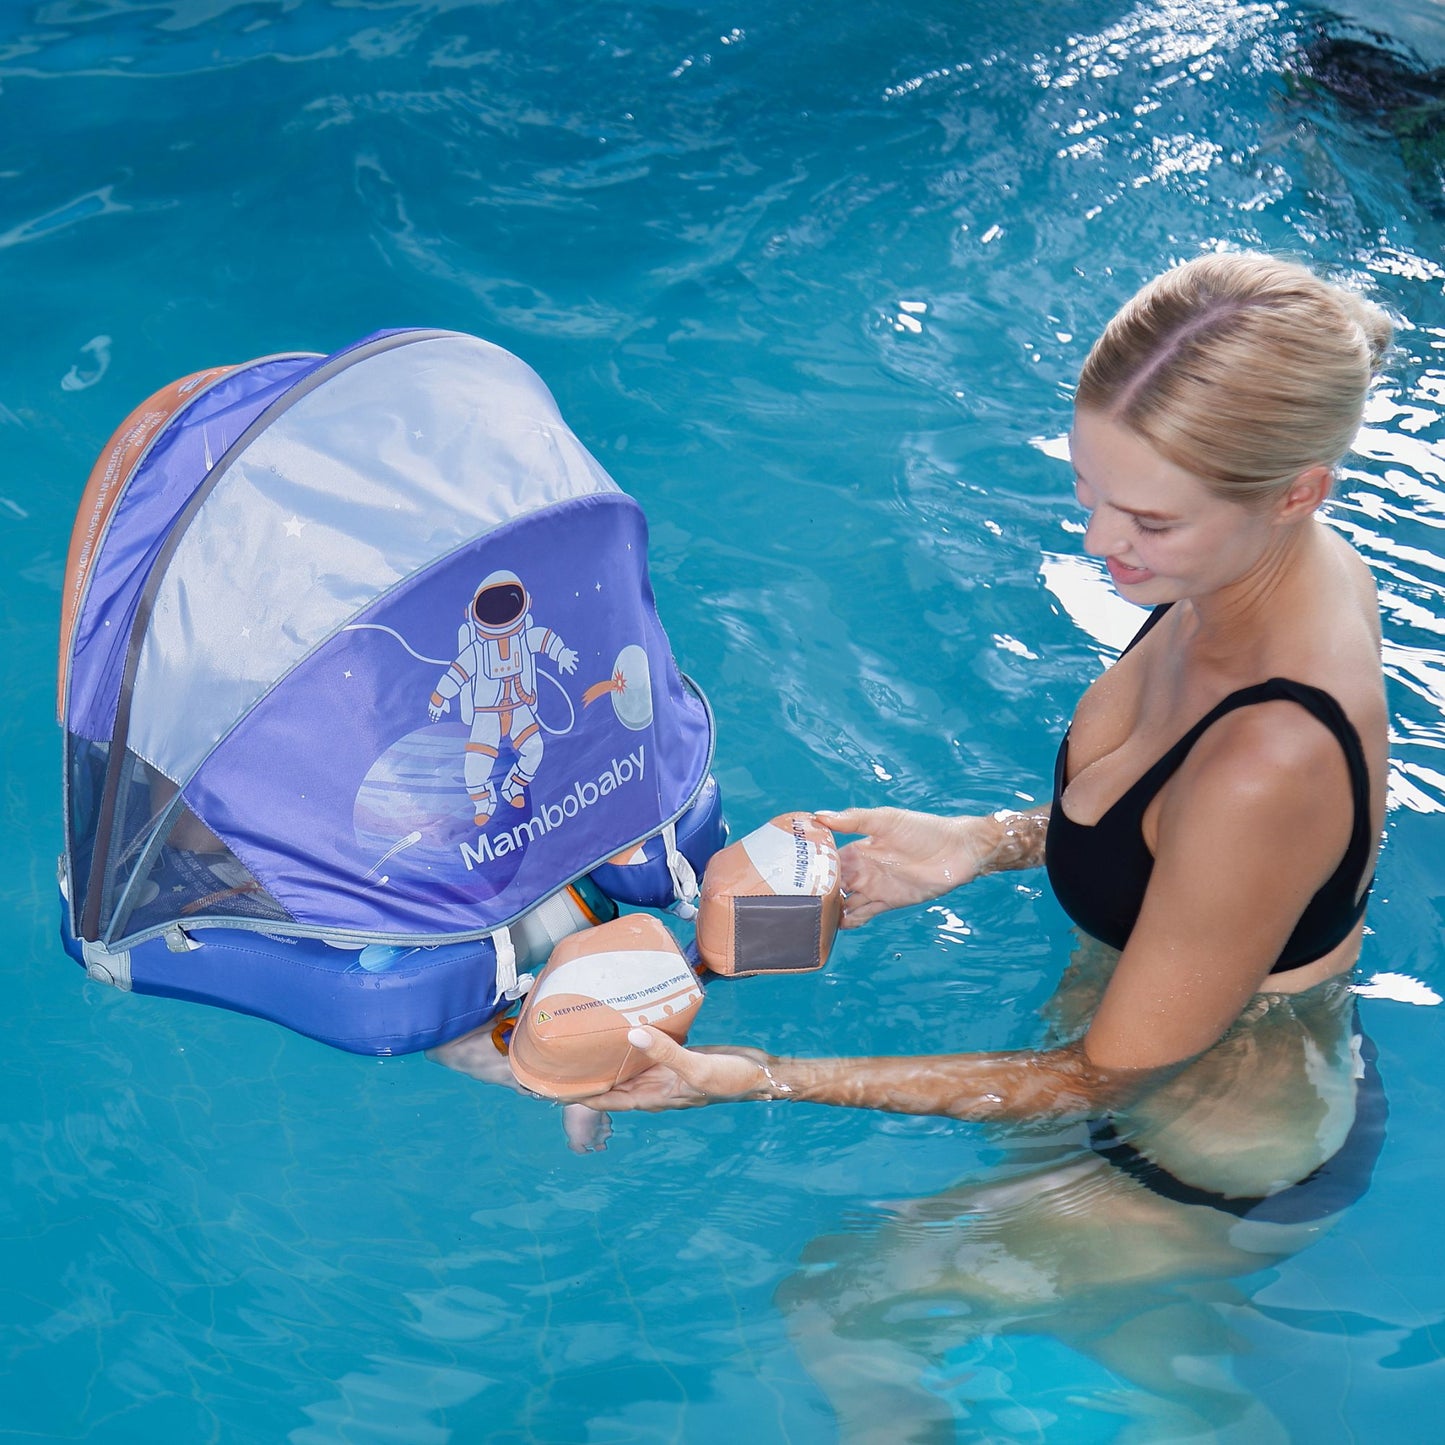 Mambobaby Swim Float with Canopy Astronauts